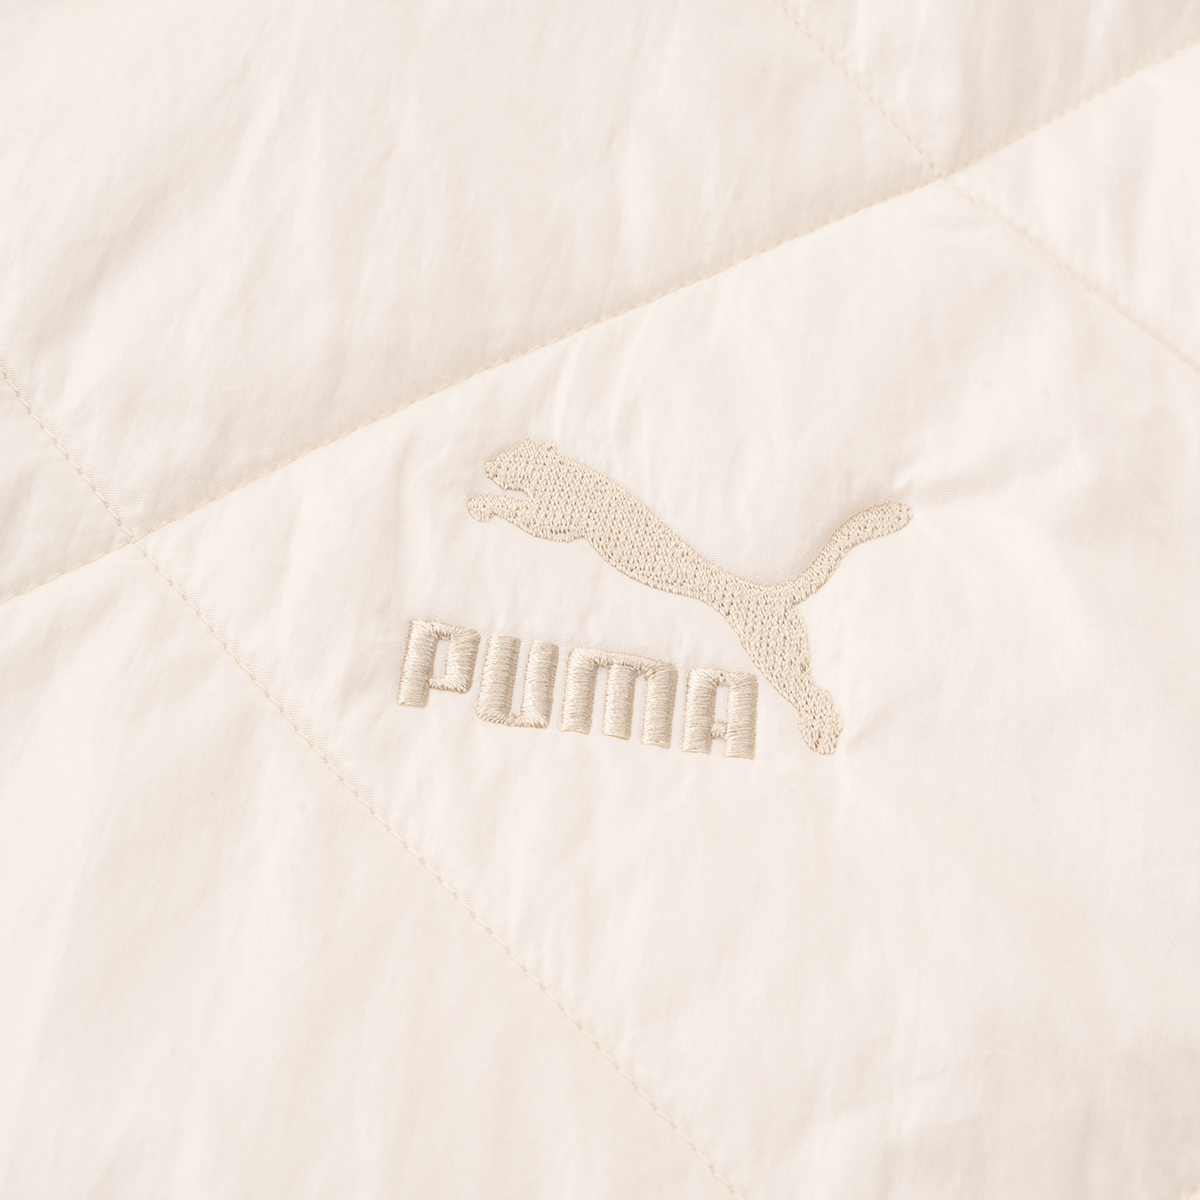 Campera Puma Classics Oversized Mujer,  image number null